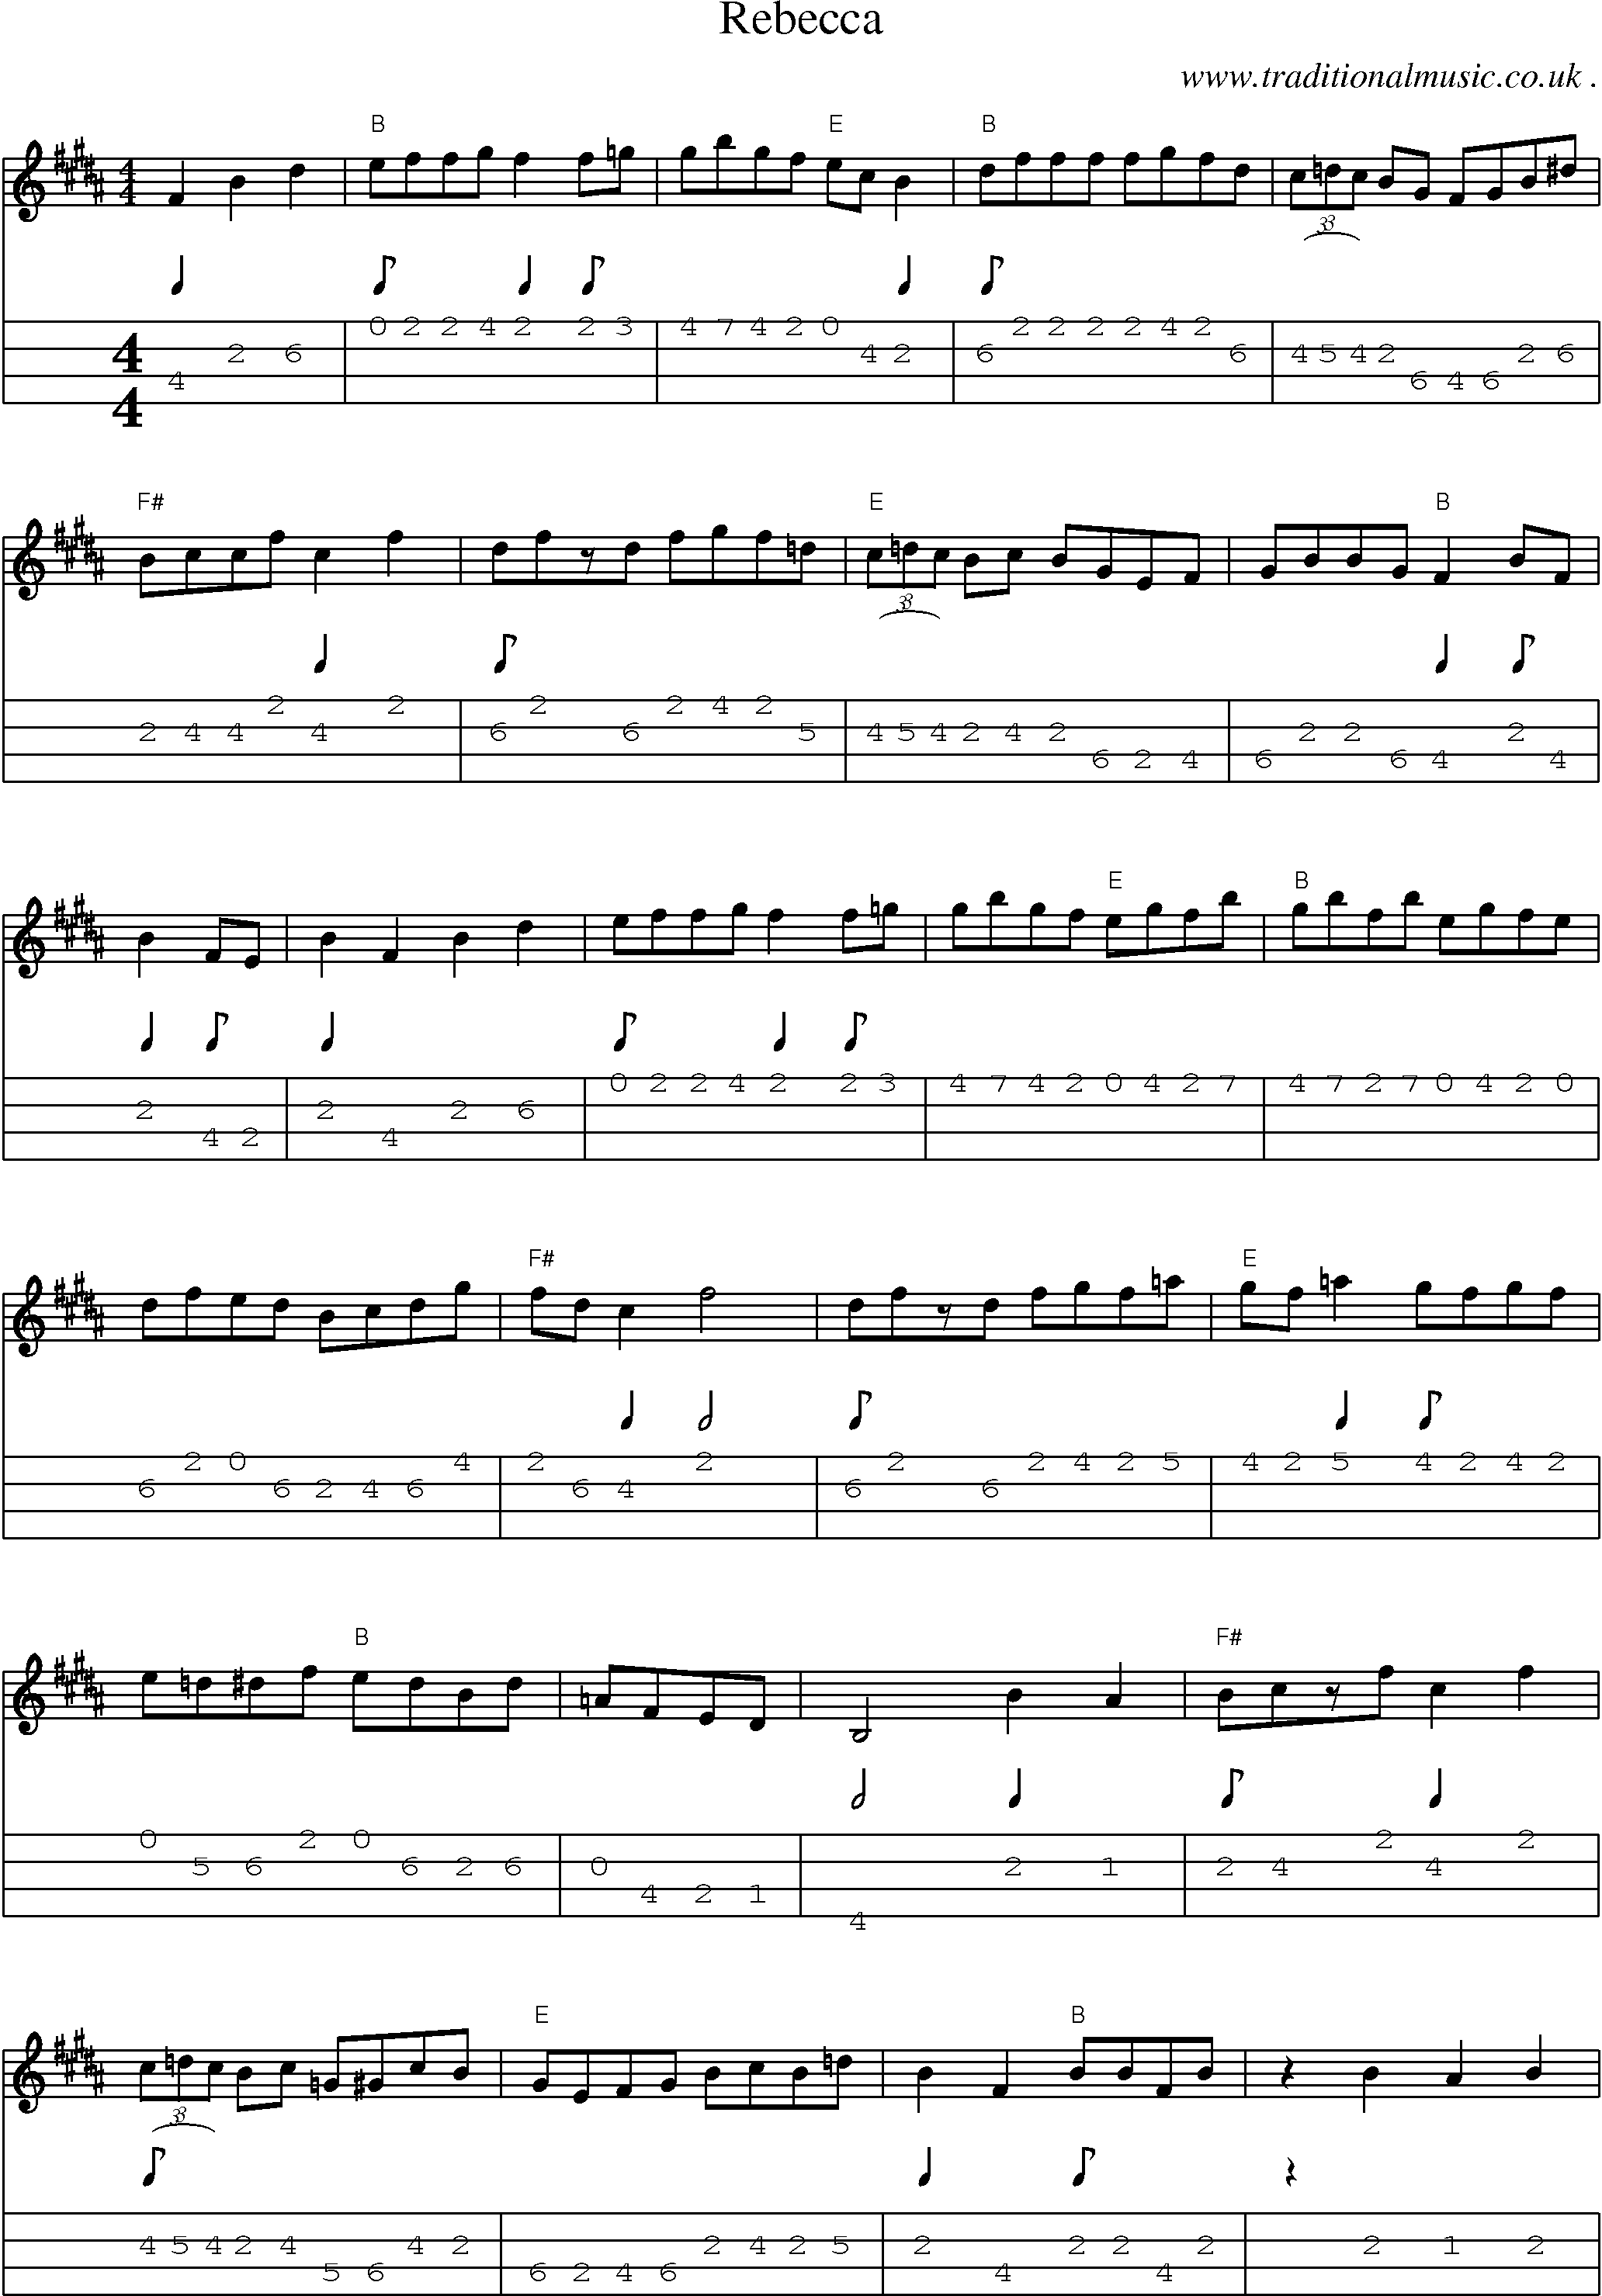 Music Score and Guitar Tabs for Rebecca